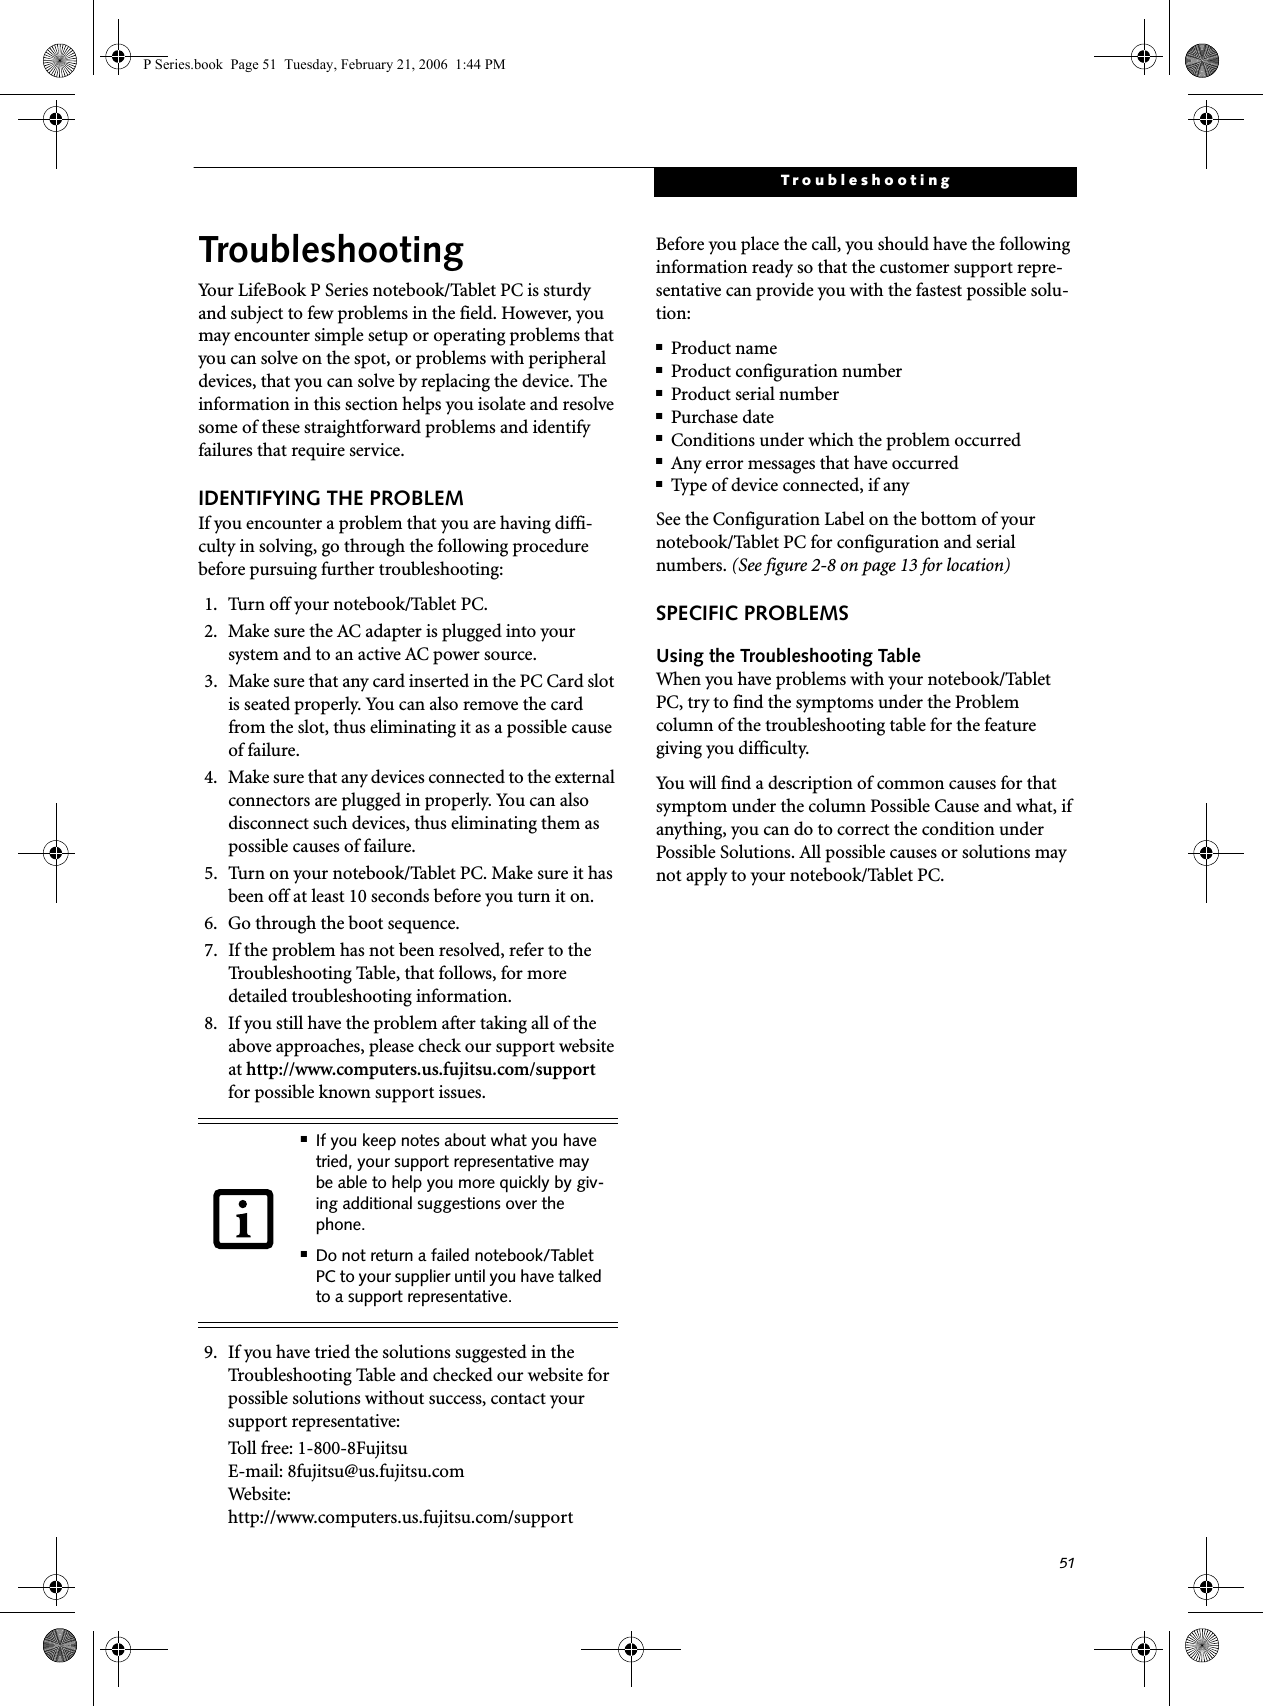 51TroubleshootingTroubleshootingYour LifeBook P Series notebook/Tablet PC is sturdy and subject to few problems in the field. However, you may encounter simple setup or operating problems that you can solve on the spot, or problems with peripheral devices, that you can solve by replacing the device. The information in this section helps you isolate and resolve some of these straightforward problems and identify failures that require service.IDENTIFYING THE PROBLEMIf you encounter a problem that you are having diffi-culty in solving, go through the following procedure before pursuing further troubleshooting:1. Turn off your notebook/Tablet PC.2. Make sure the AC adapter is plugged into your system and to an active AC power source.3. Make sure that any card inserted in the PC Card slot is seated properly. You can also remove the card from the slot, thus eliminating it as a possible cause of failure.4. Make sure that any devices connected to the external connectors are plugged in properly. You can also disconnect such devices, thus eliminating them as possible causes of failure.5. Turn on your notebook/Tablet PC. Make sure it has been off at least 10 seconds before you turn it on.6. Go through the boot sequence.7. If the problem has not been resolved, refer to the Troubleshooting Table, that follows, for more detailed troubleshooting information.8. If you still have the problem after taking all of the above approaches, please check our support website at http://www.computers.us.fujitsu.com/support for possible known support issues. 9. If you have tried the solutions suggested in the Troubleshooting Table and checked our website for possible solutions without success, contact your support representative: Toll free: 1-800-8Fujitsu E-mail: 8fujitsu@us.fujitsu.comWe bsi t e:  http://www.computers.us.fujitsu.com/supportBefore you place the call, you should have the following information ready so that the customer support repre-sentative can provide you with the fastest possible solu-tion:■Product name■Product configuration number■Product serial number■Purchase date■Conditions under which the problem occurred■Any error messages that have occurred■Type of device connected, if anySee the Configuration Label on the bottom of yournotebook/Tablet PC for configuration and serial numbers. (See figure 2-8 on page 13 for location)SPECIFIC PROBLEMSUsing the Troubleshooting TableWhen you have problems with your notebook/Tablet PC, try to find the symptoms under the Problem column of the troubleshooting table for the feature giving you difficulty. You will find a description of common causes for that symptom under the column Possible Cause and what, if anything, you can do to correct the condition under Possible Solutions. All possible causes or solutions may not apply to your notebook/Tablet PC.■If you keep notes about what you have tried, your support representative may be able to help you more quickly by giv-ing additional suggestions over the phone.■Do not return a failed notebook/Tablet PC to your supplier until you have talked to a support representative.P Series.book  Page 51  Tuesday, February 21, 2006  1:44 PM